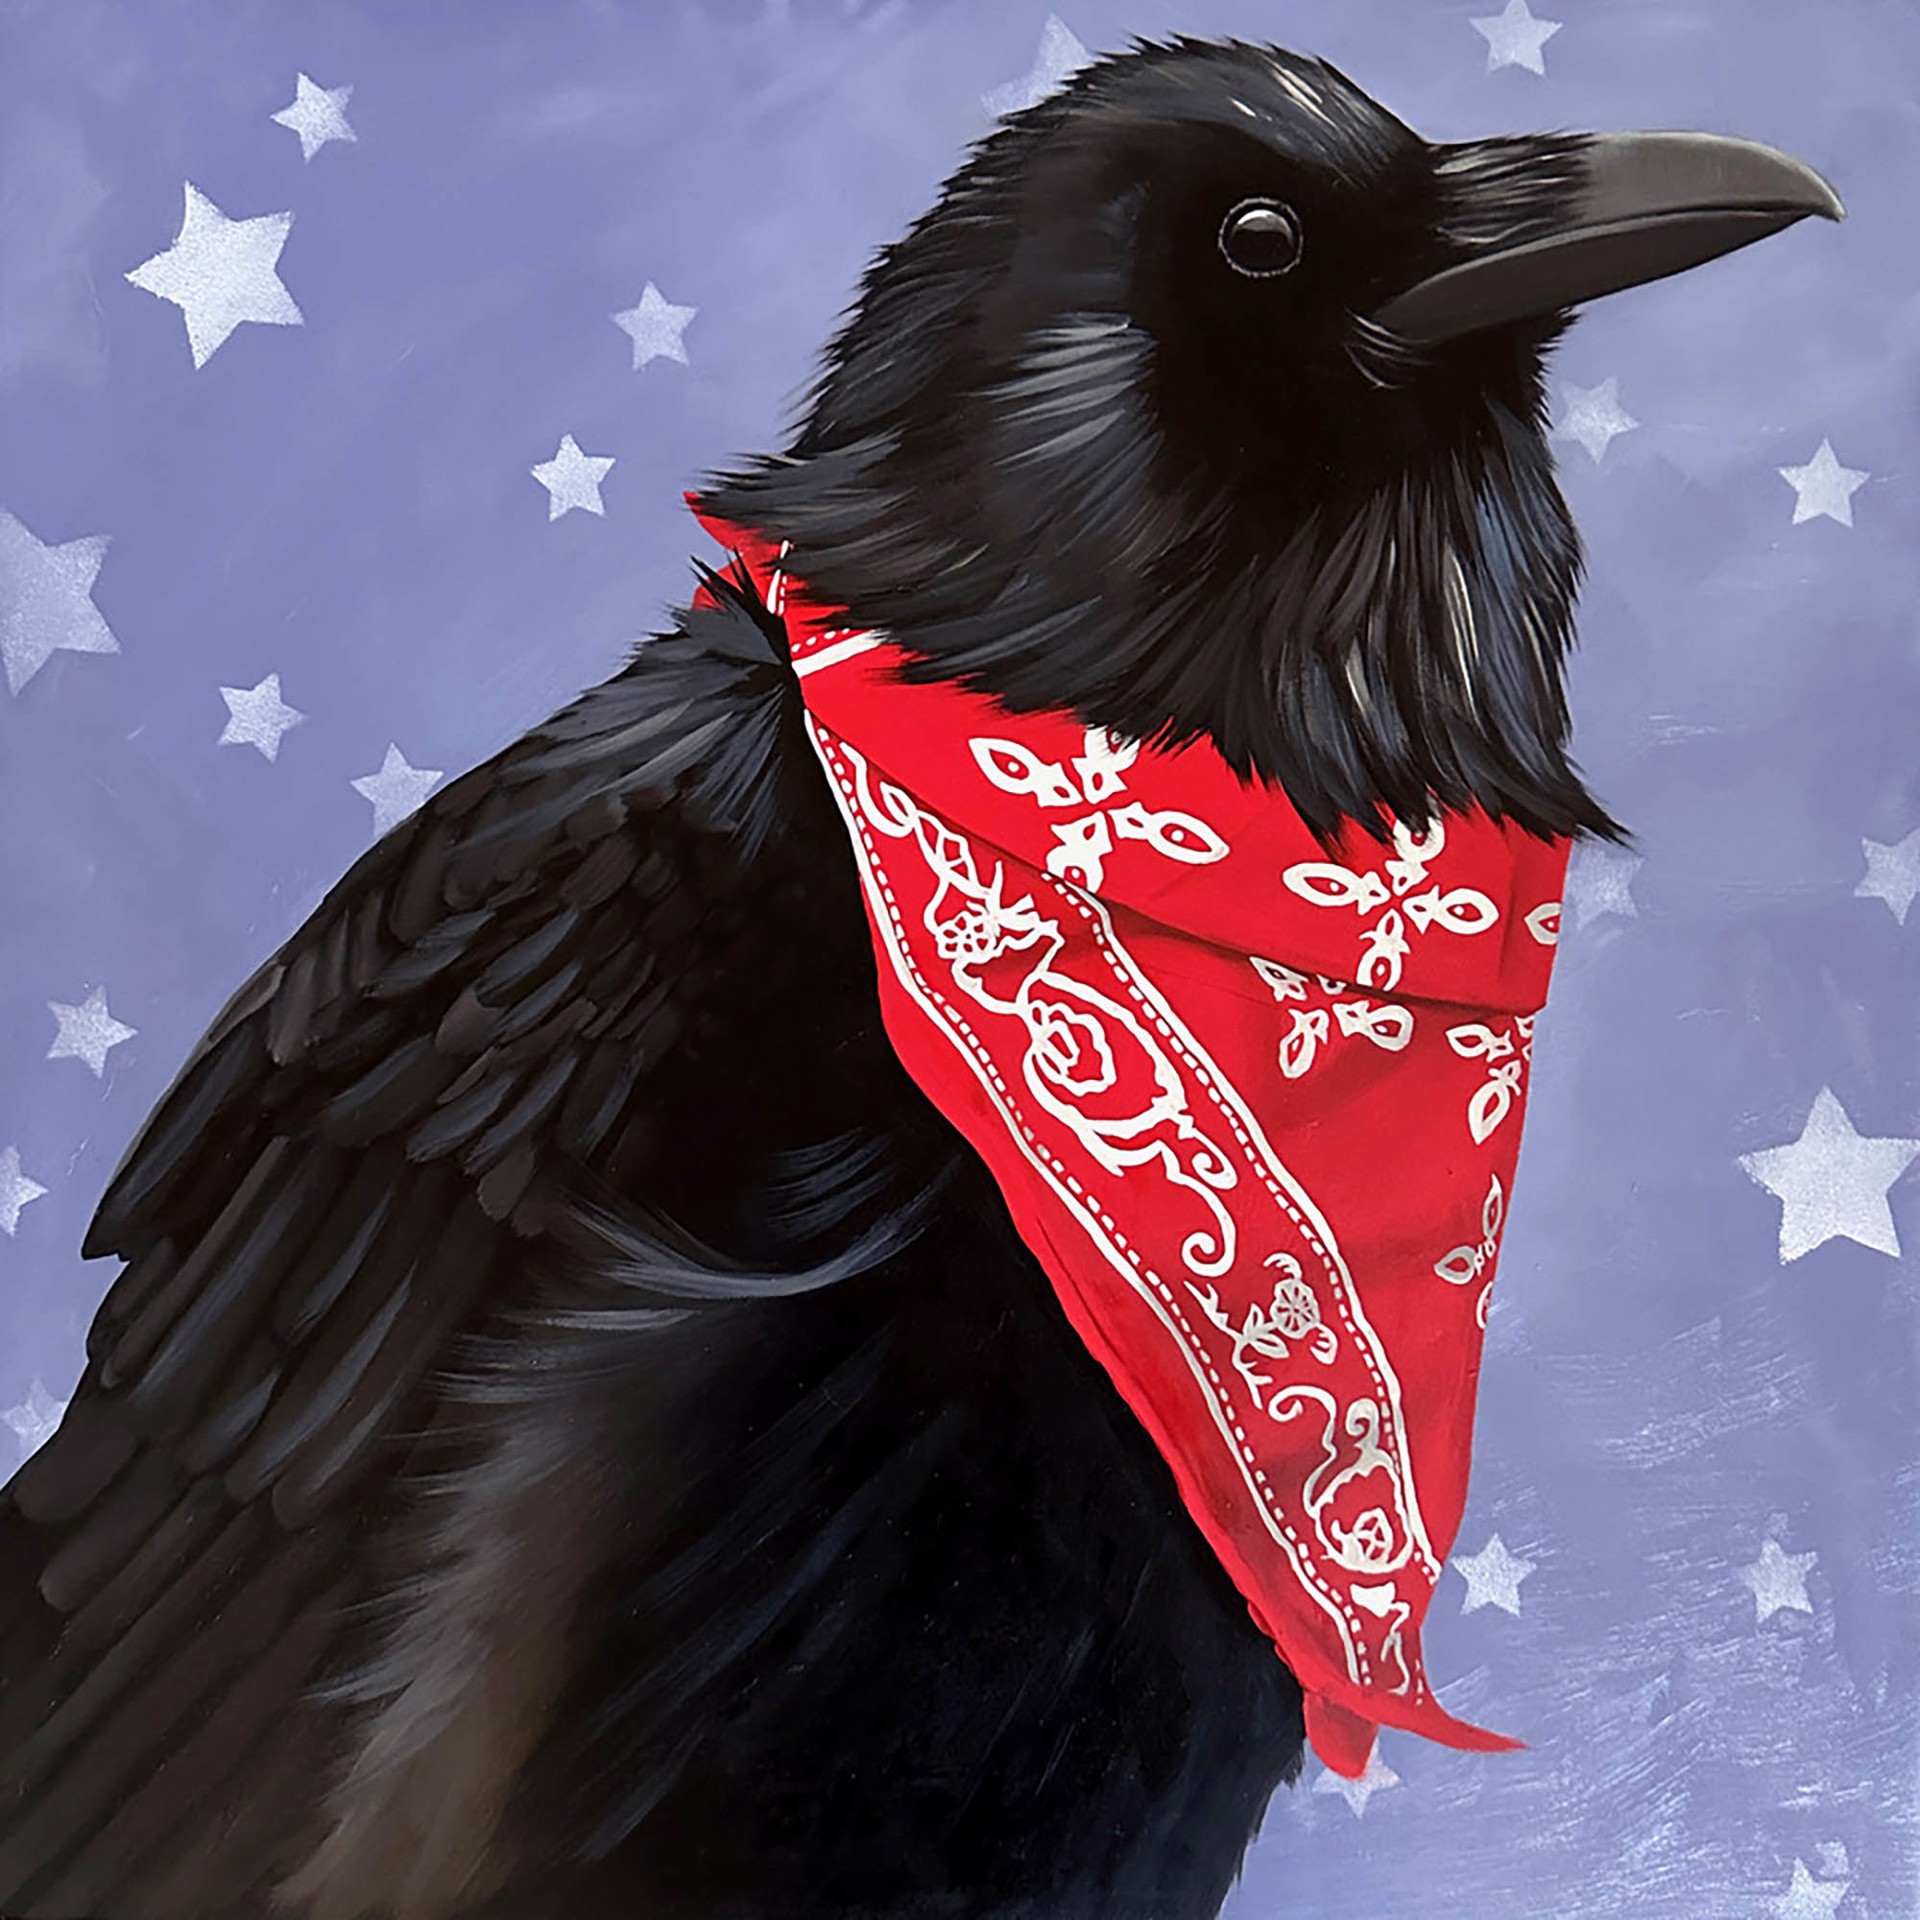 Original Painting By Christy Stallop Featuring a Raven Wearing a Red Bandana on a Blue Background with Stars